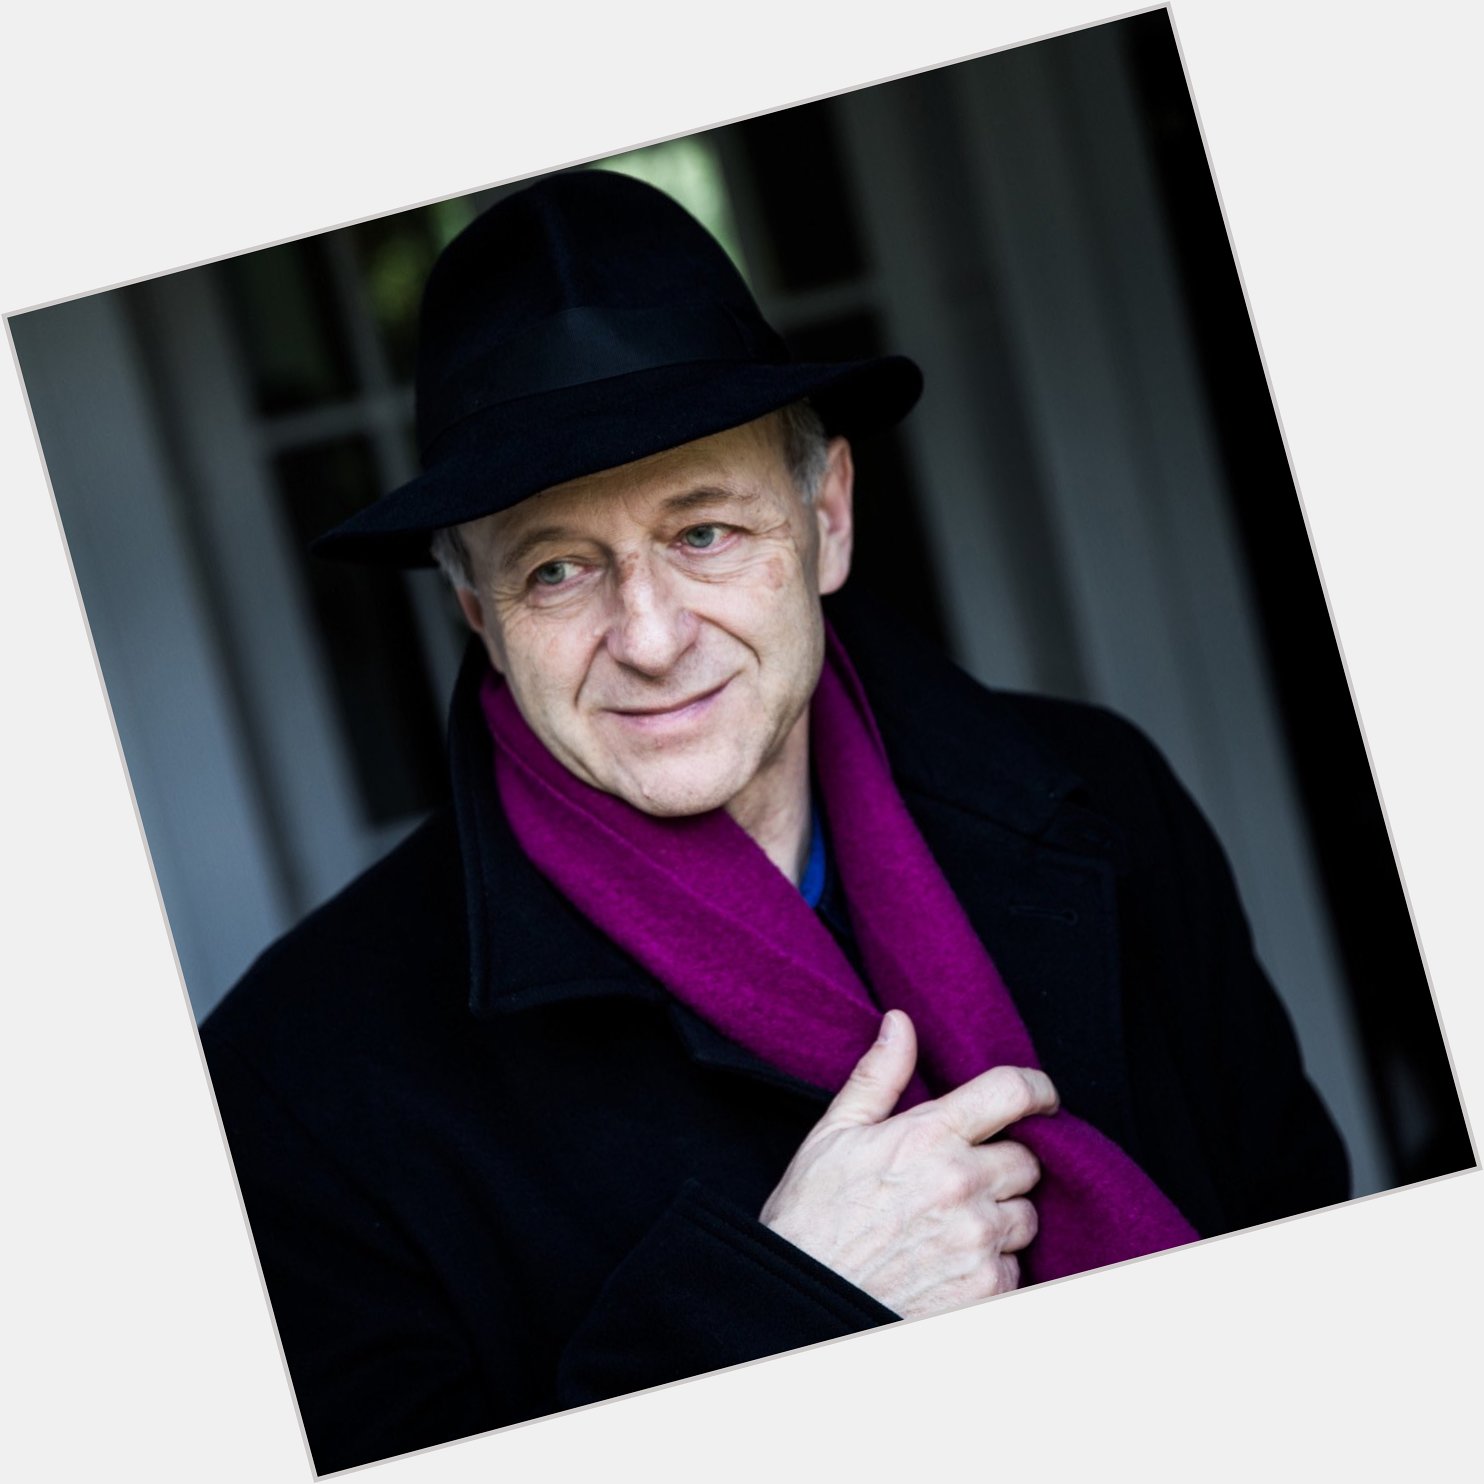 A very happy 70th birthday to the conductor Iván Fischer! 